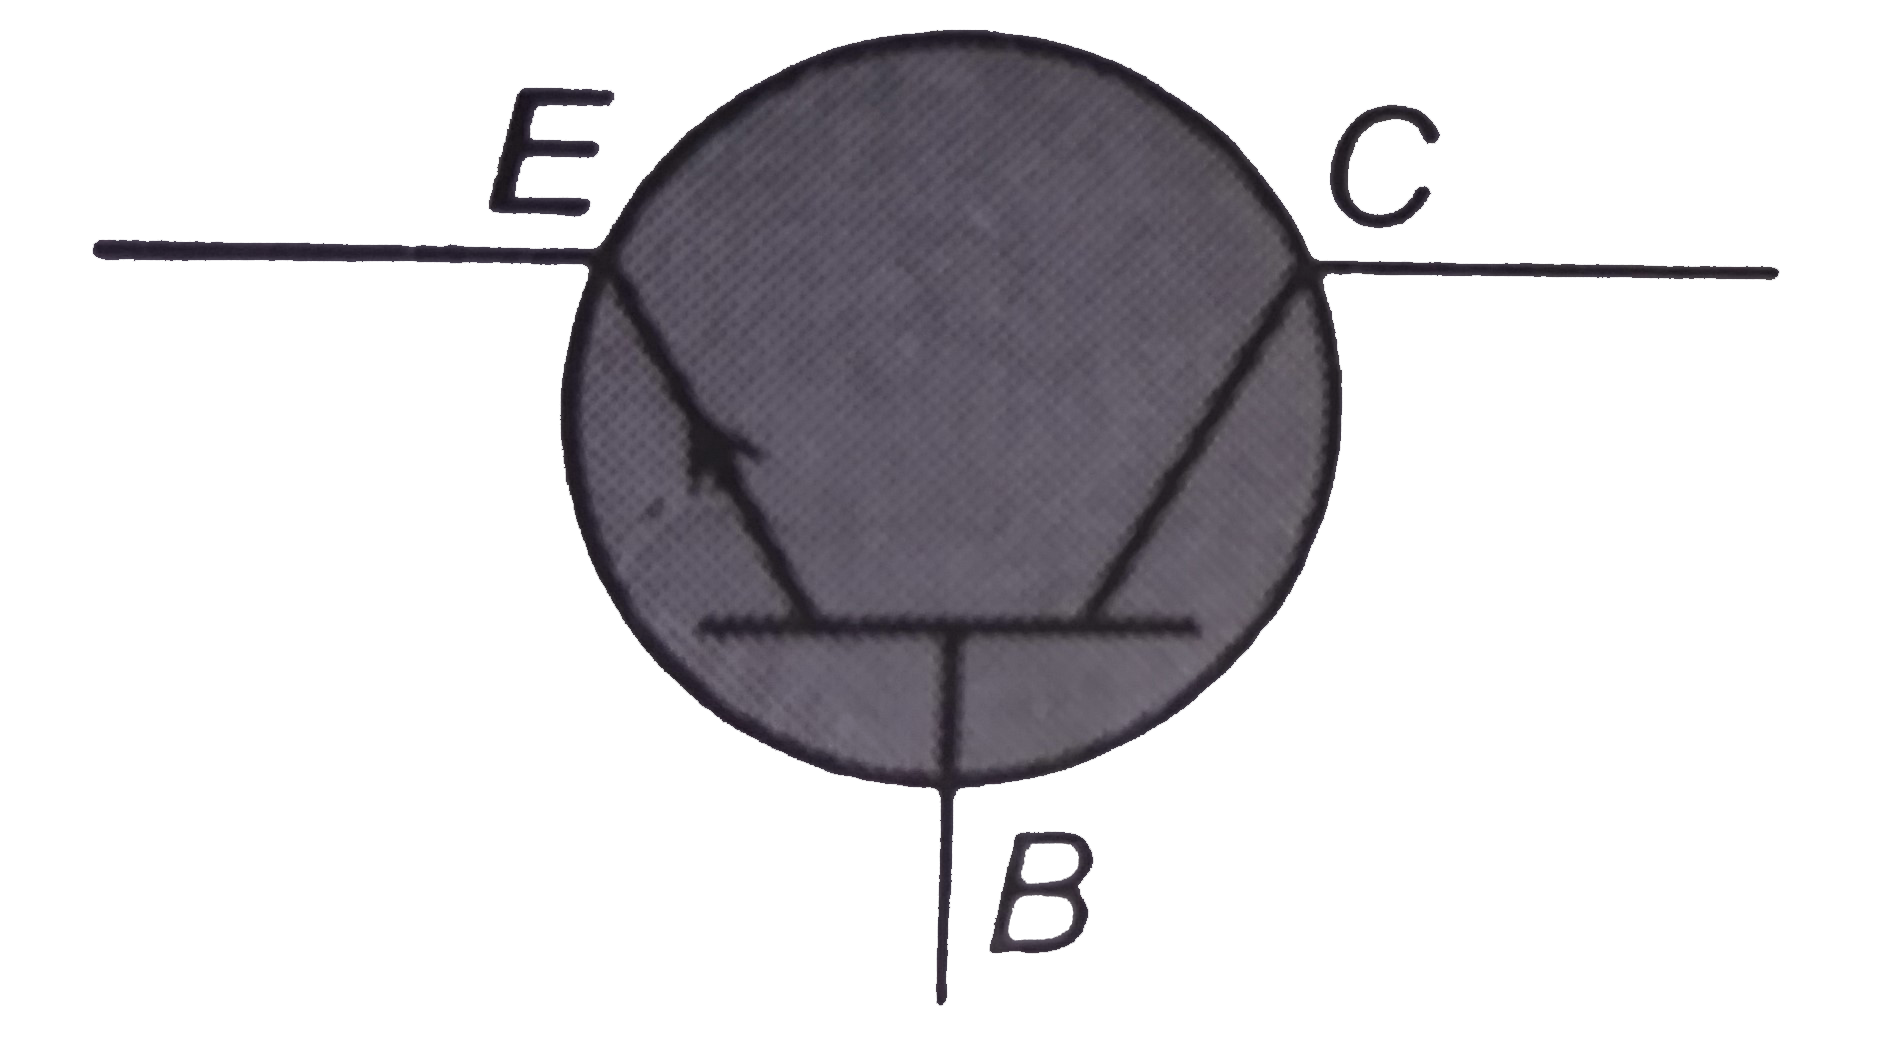 The symbol given in figure represents